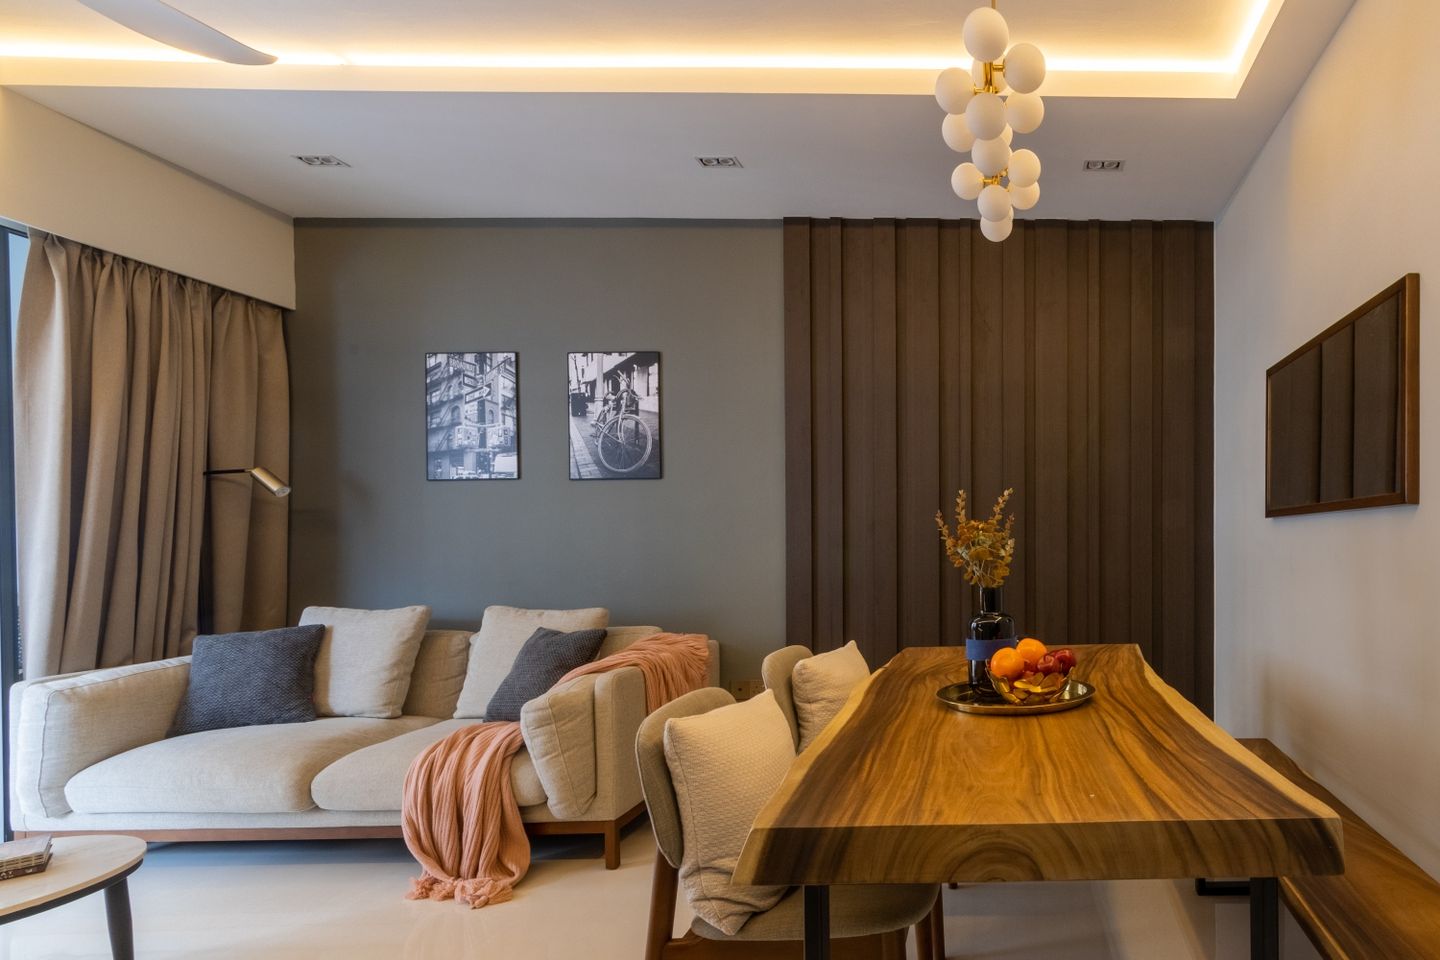 Grey And Brown Wall Design With Fluted Panels - Livspace